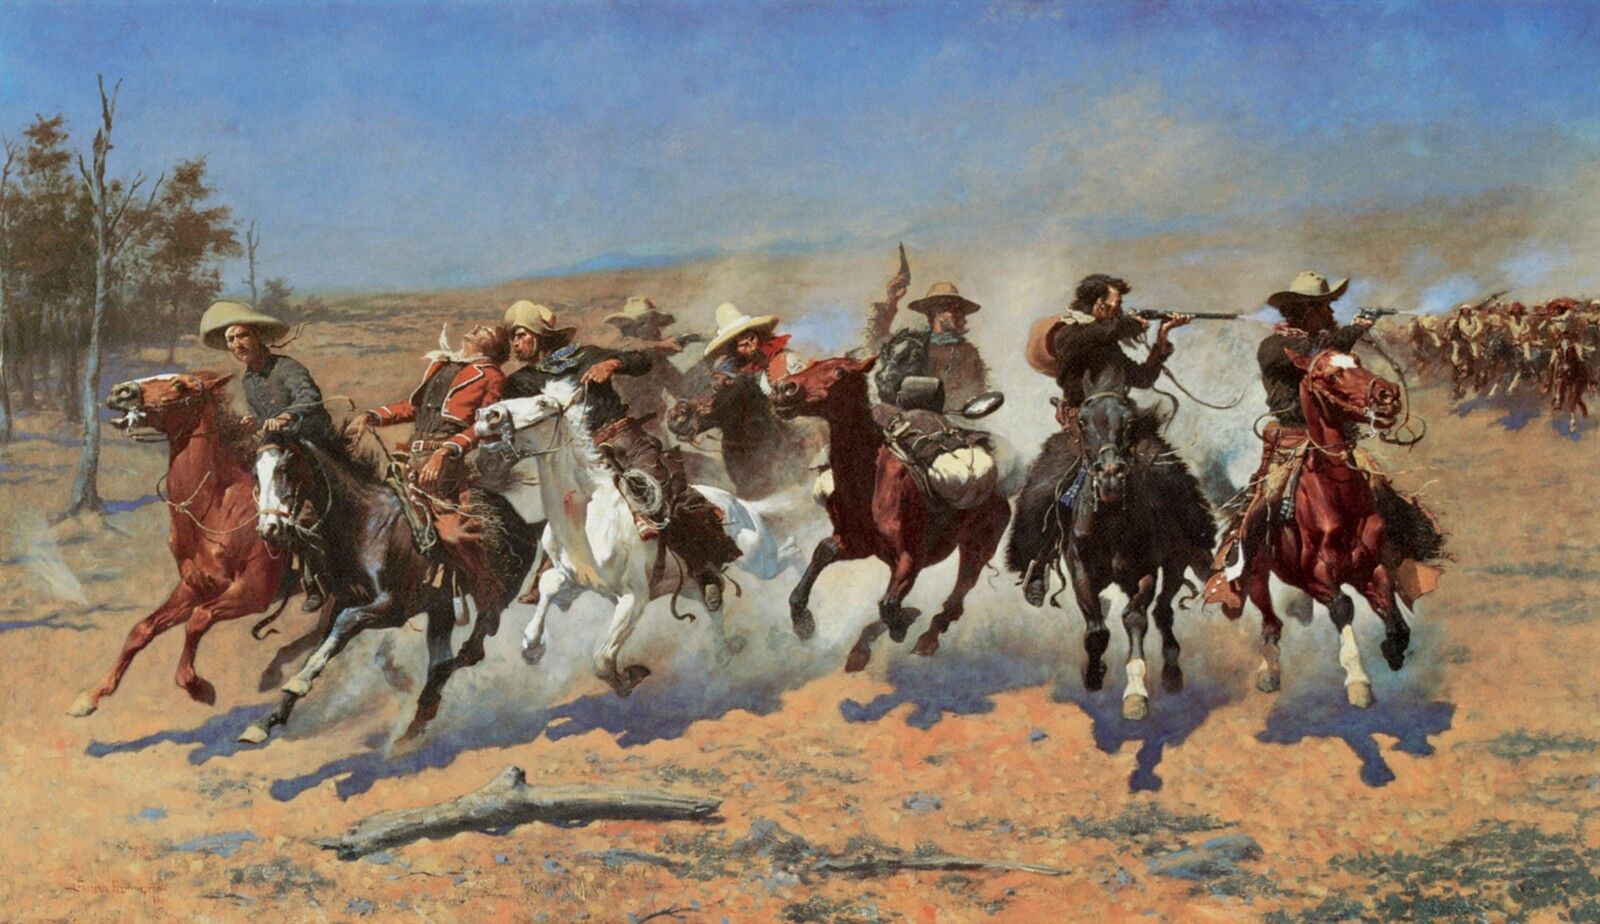 A Dash for the Timber by Frederic Remington Western Cowboys Paper Giclee 24x48